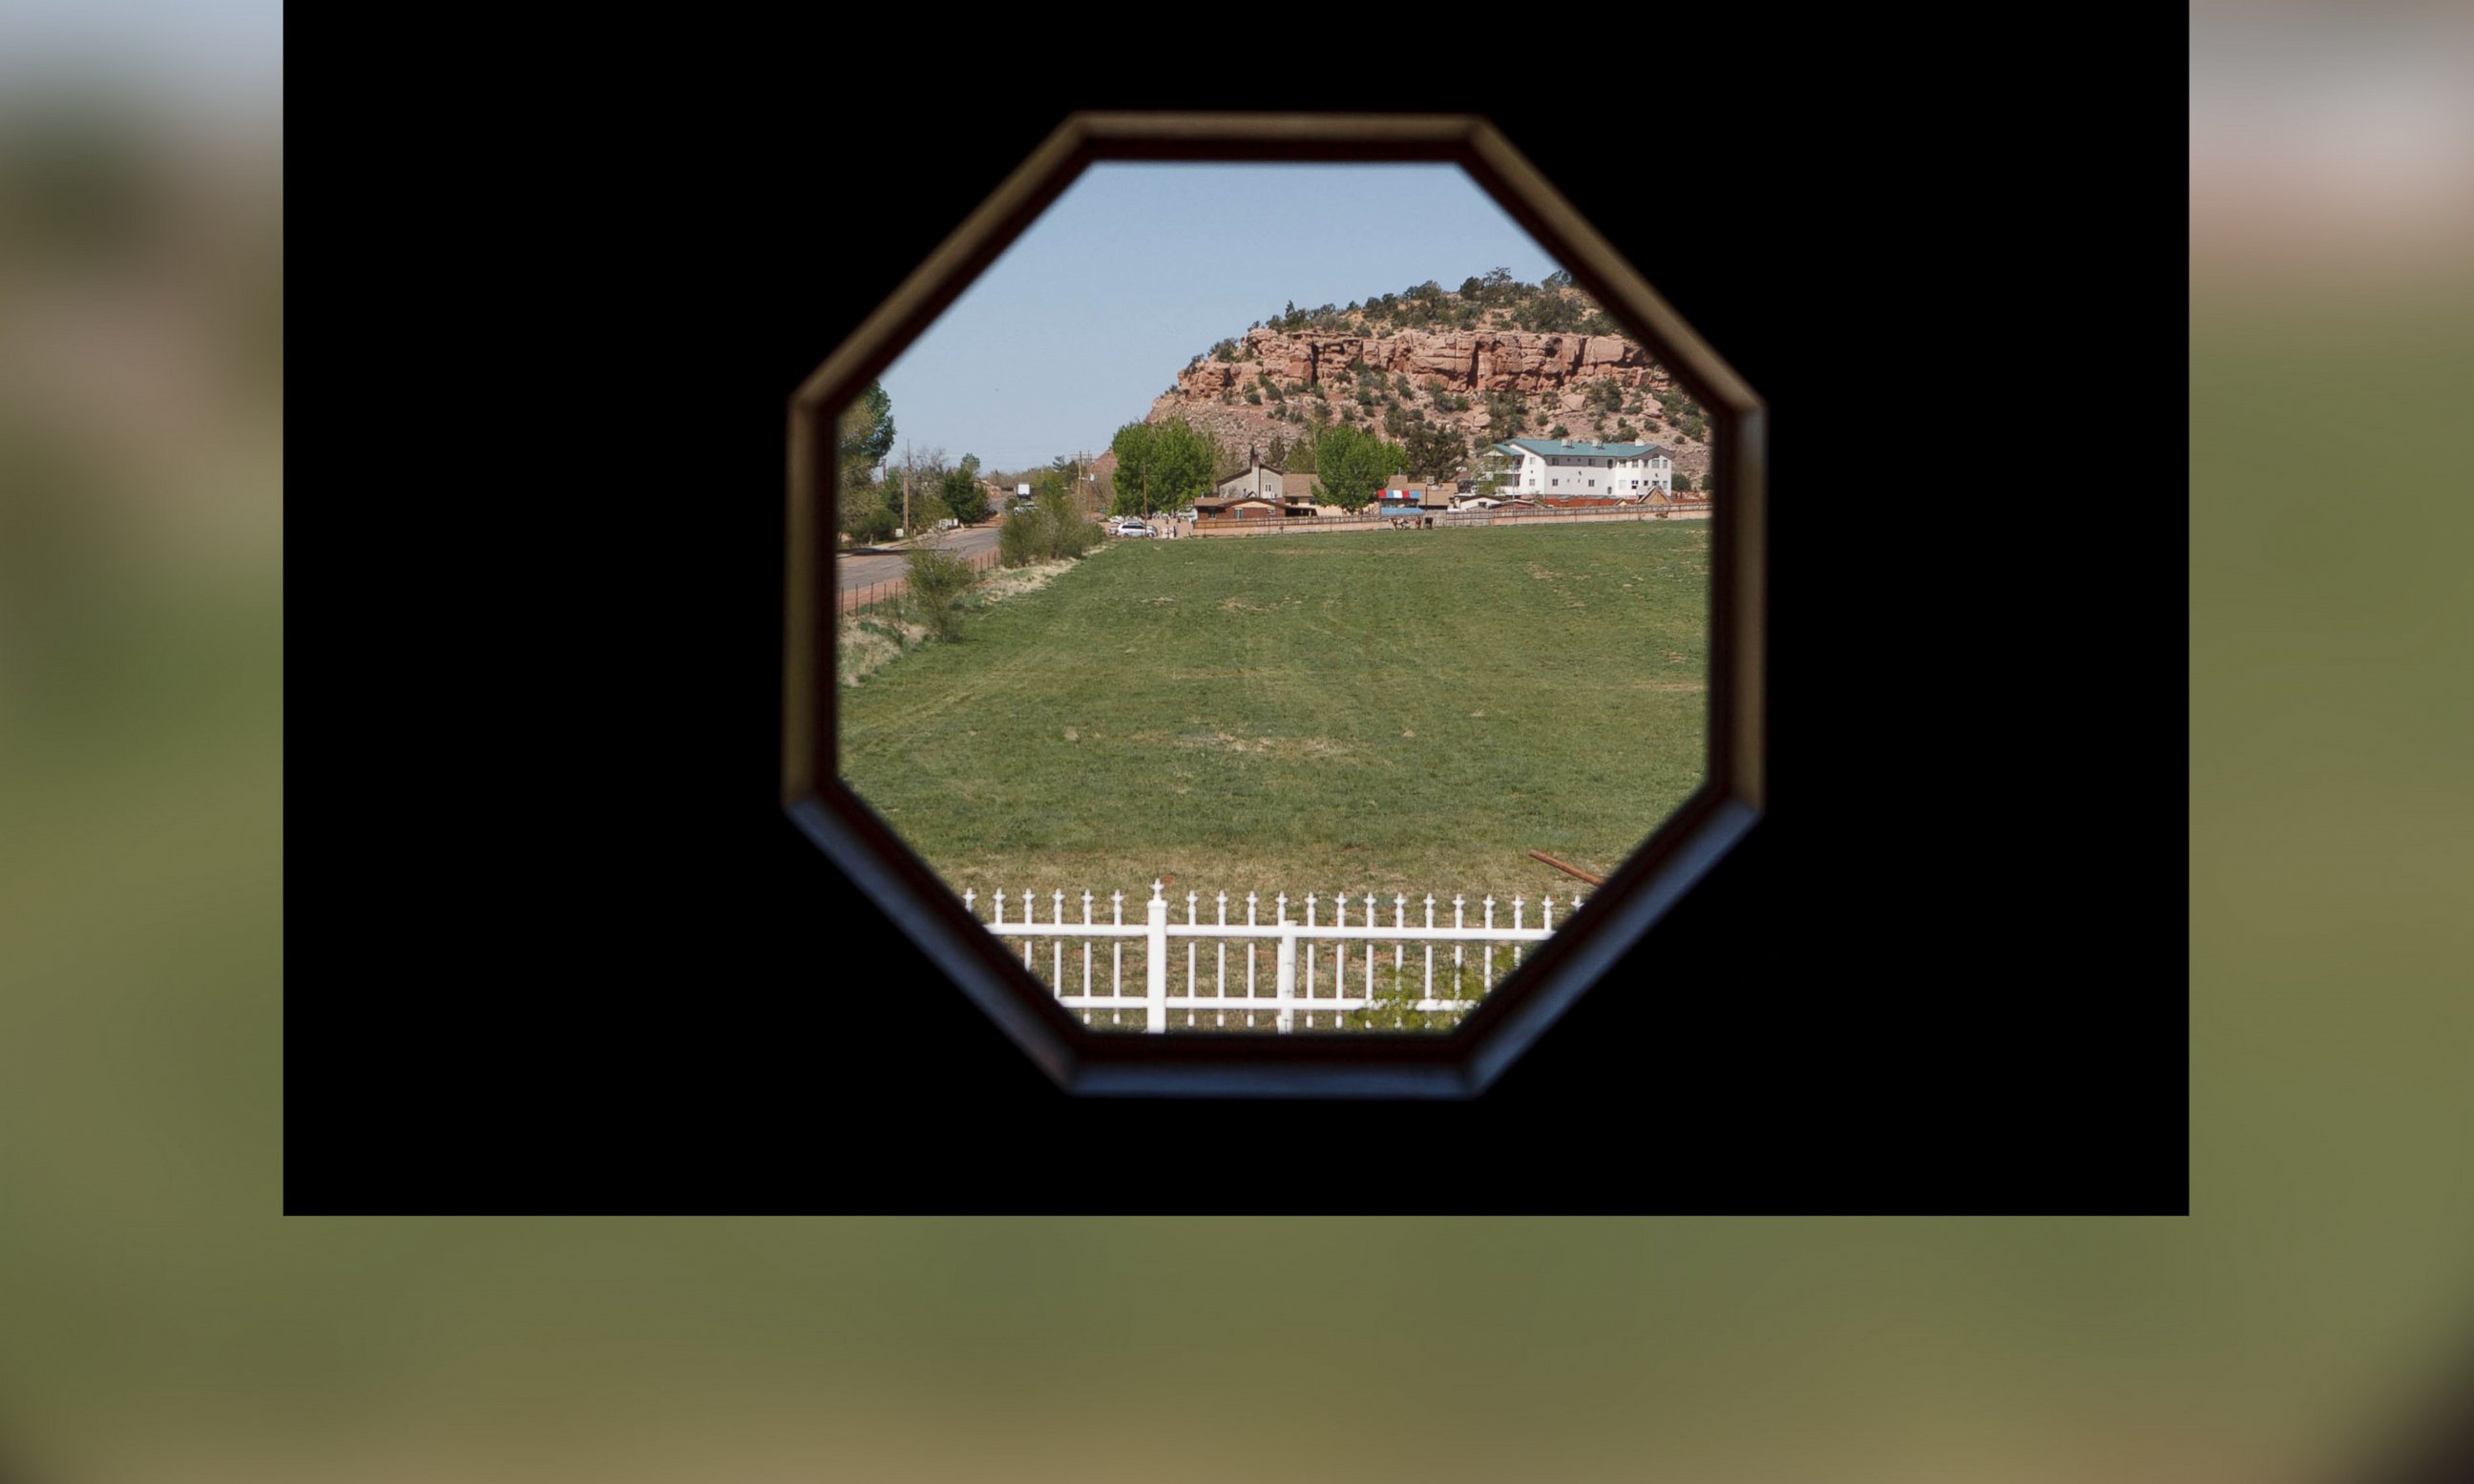 PHOTO: In this April 26, 2013 photo, the view is seen outside a window of a home intended for the family of Warren Jeffs in Hildale, Utah.